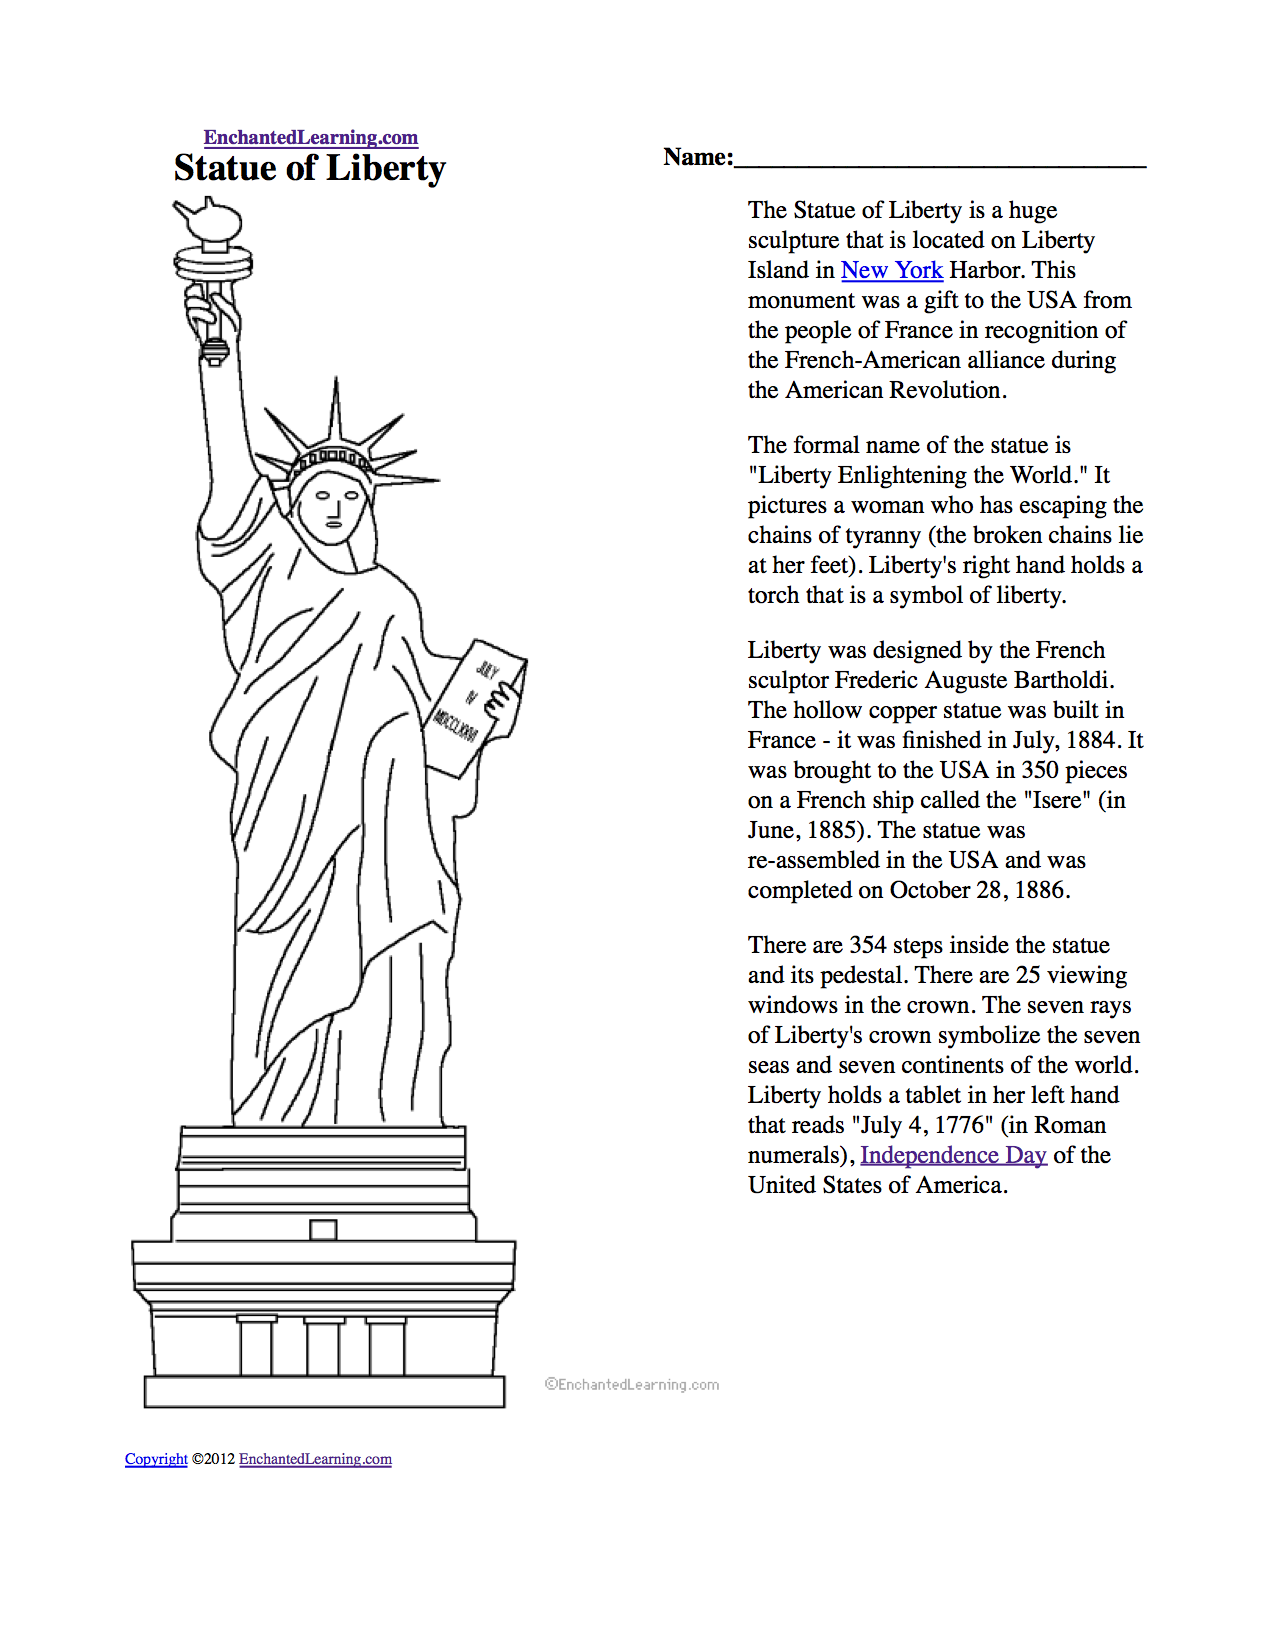 free-coloring-book-page-of-statue-of-liberty-download-free-coloring